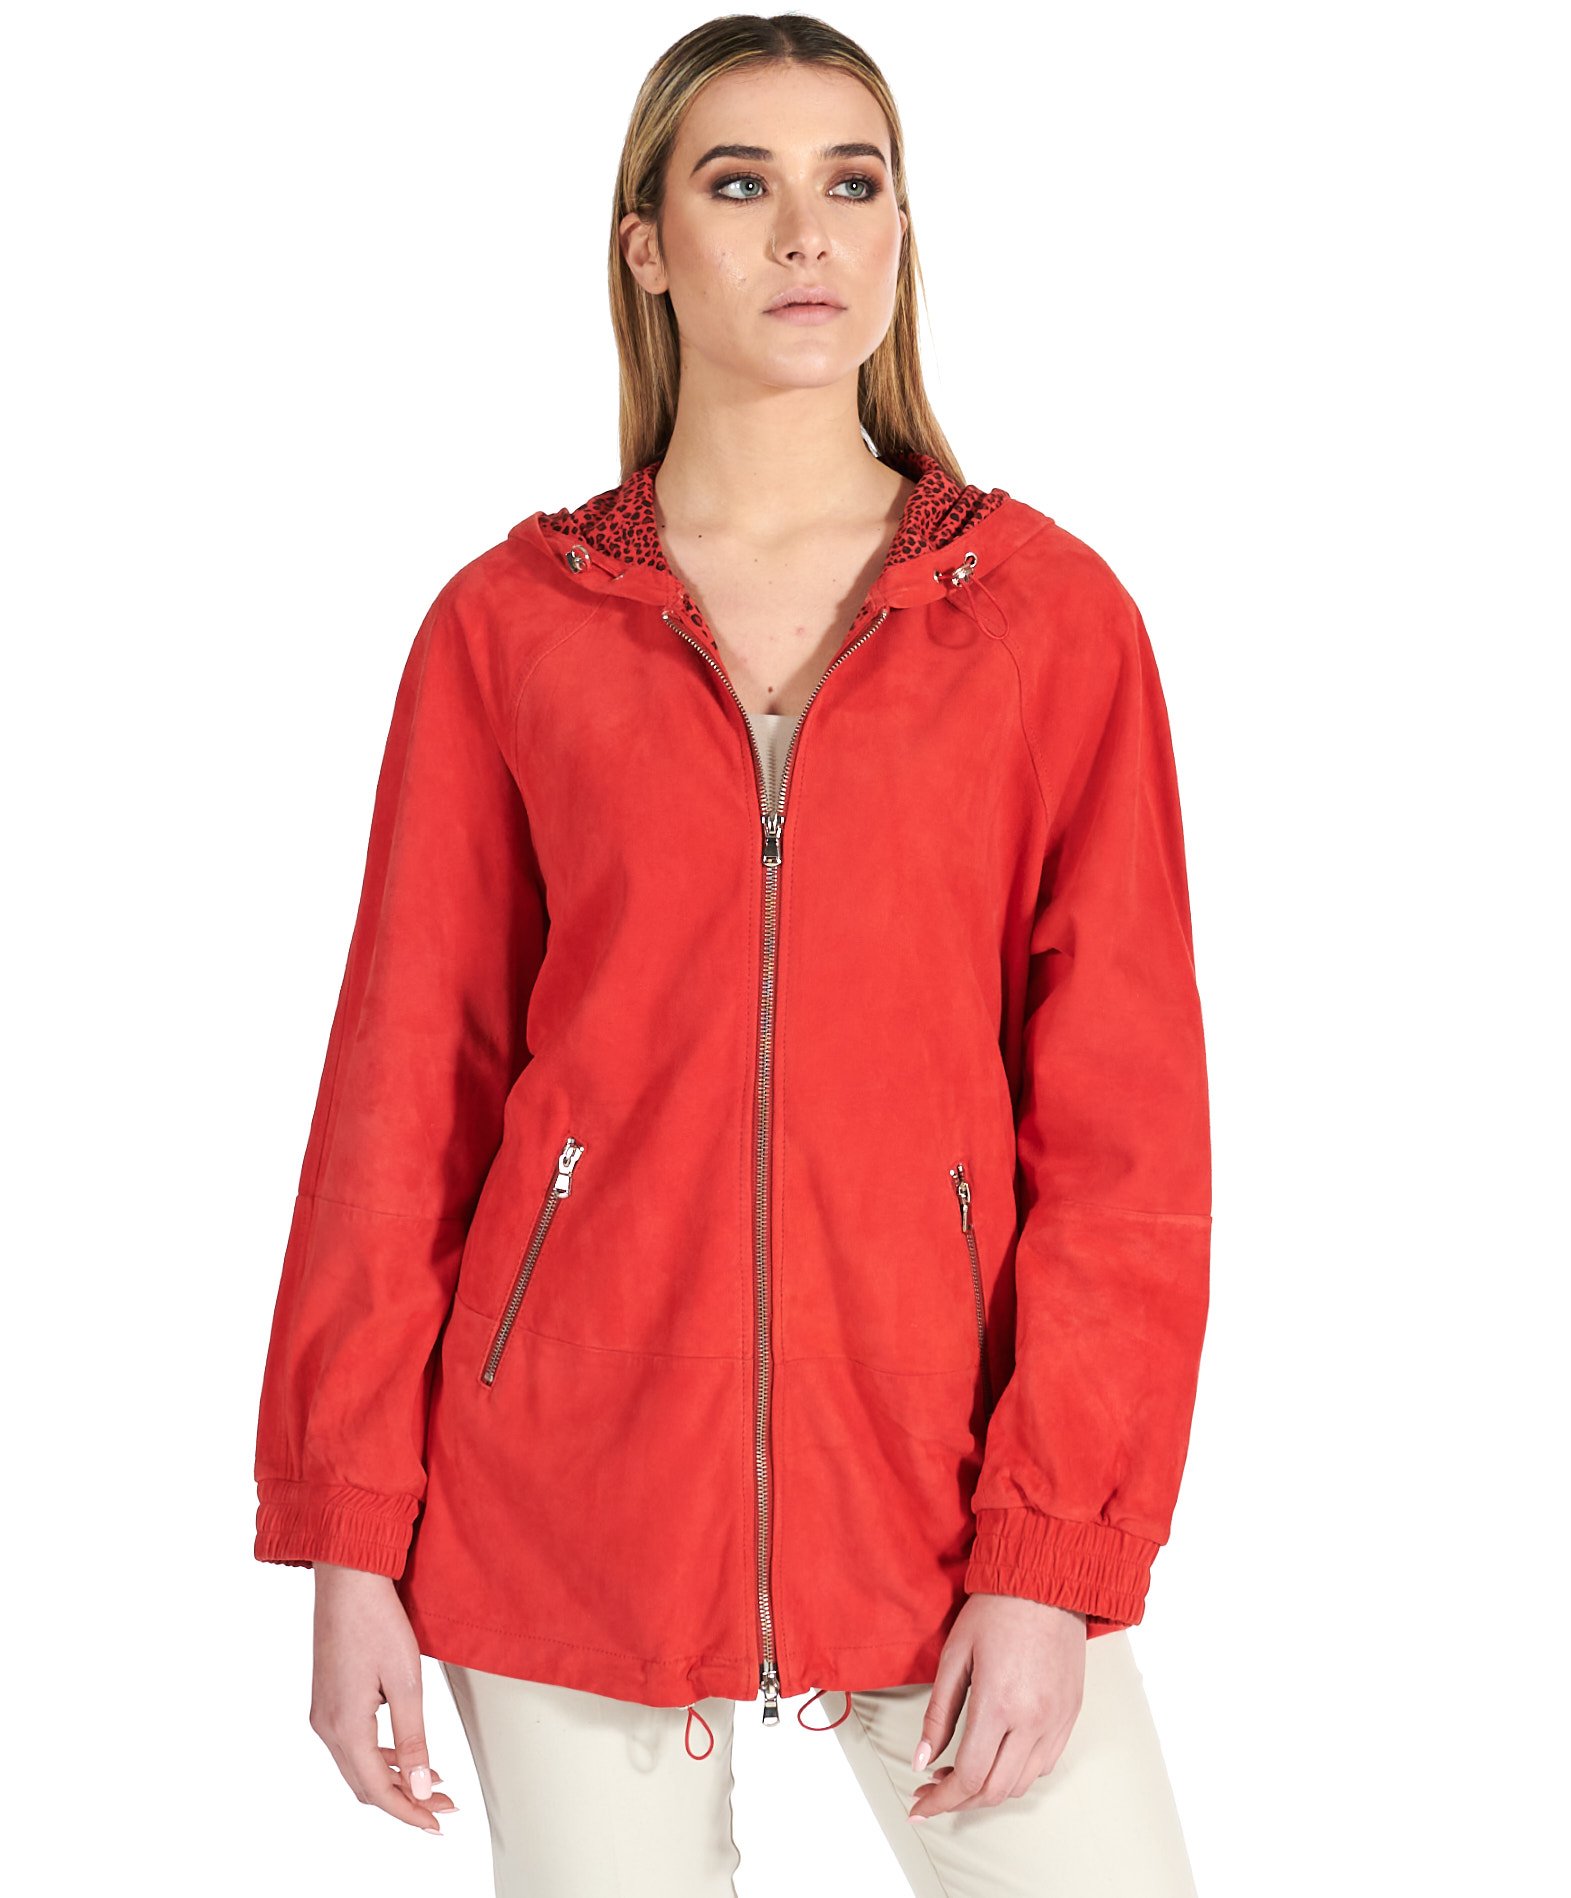 Red hooded suede leather jacket k-way style